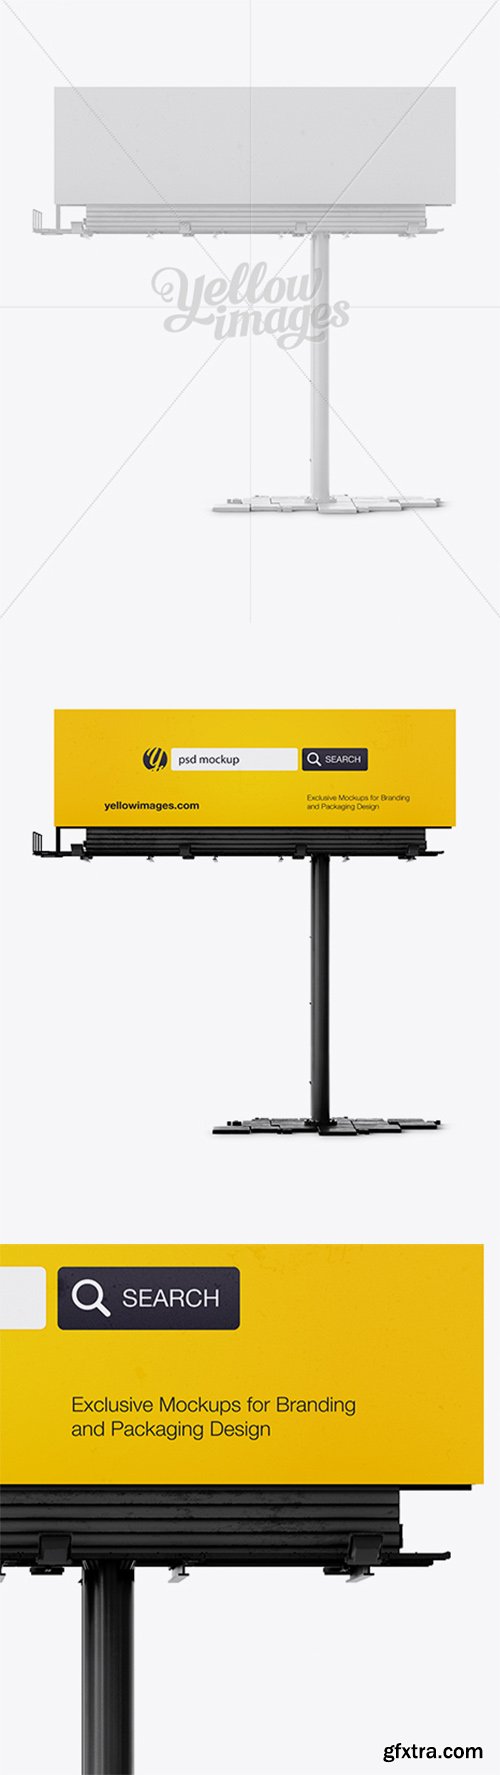 Download Billboard Mockup Generator - Free PSD Mockups Smart Object and Templates to create Magazines ...